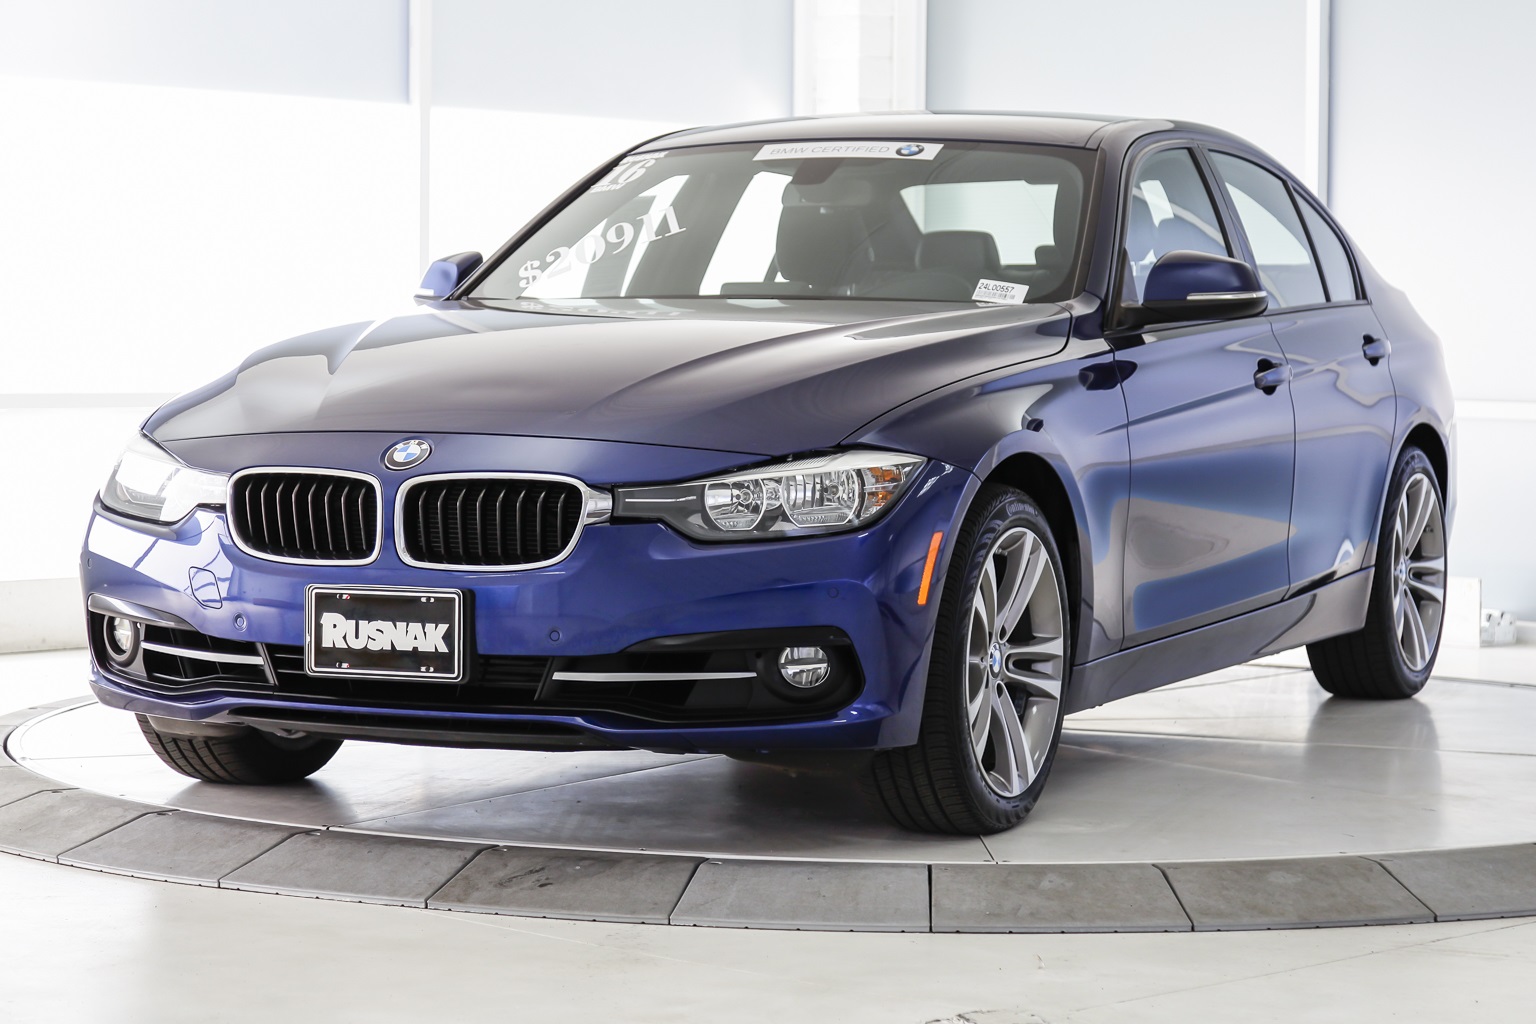 Certified PreOwned 2016 BMW 3 Series 328i 4D Sedan in Thousand Oaks